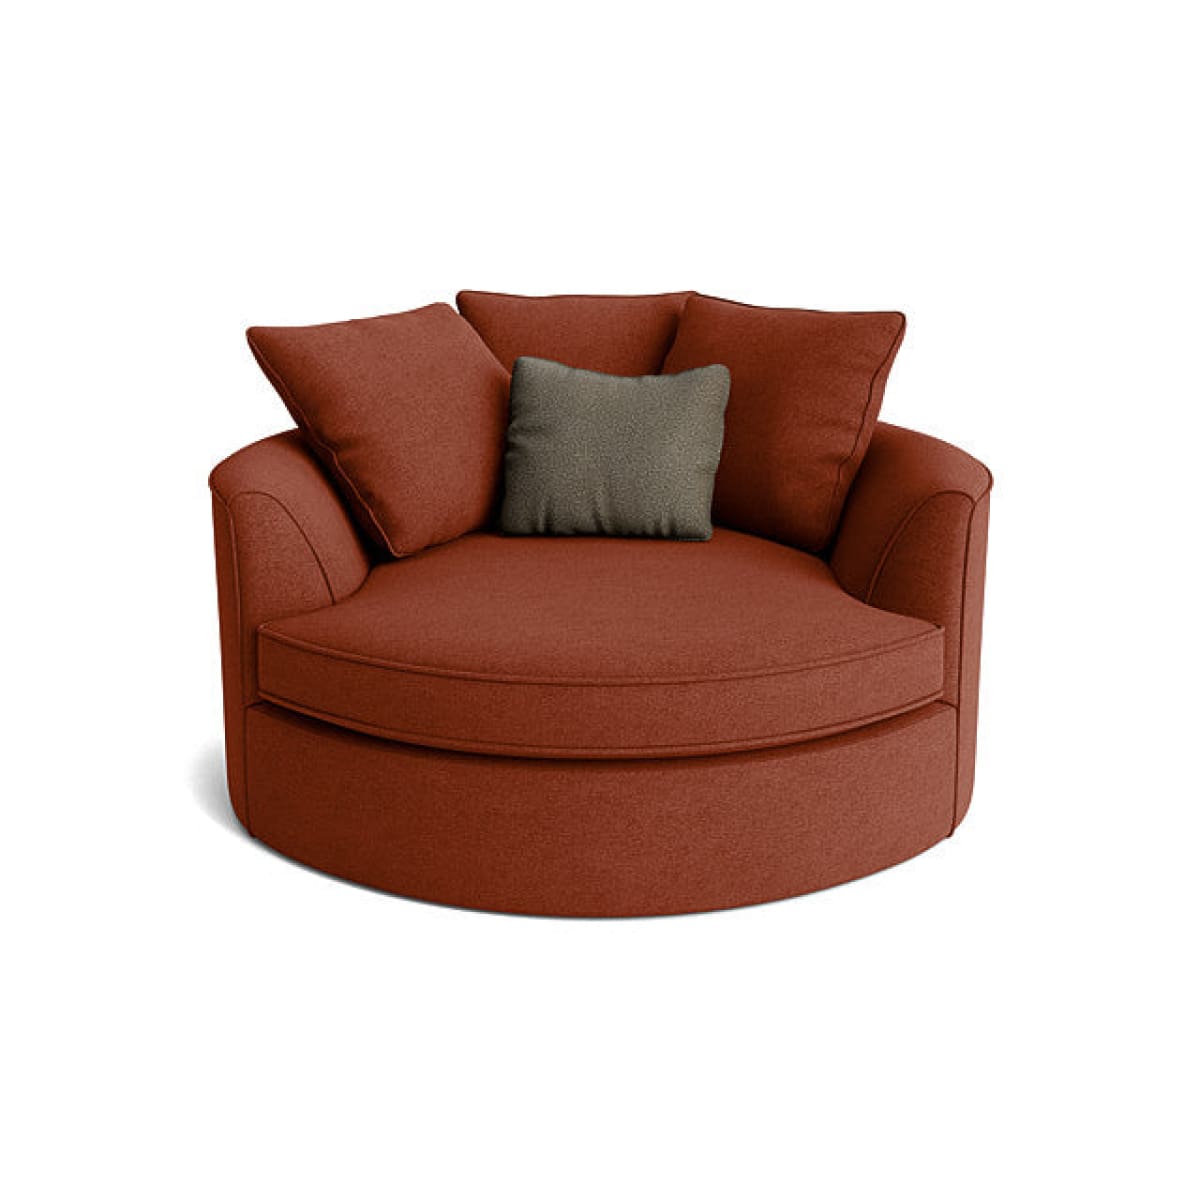 Nest Accent Chair - Entice Spice